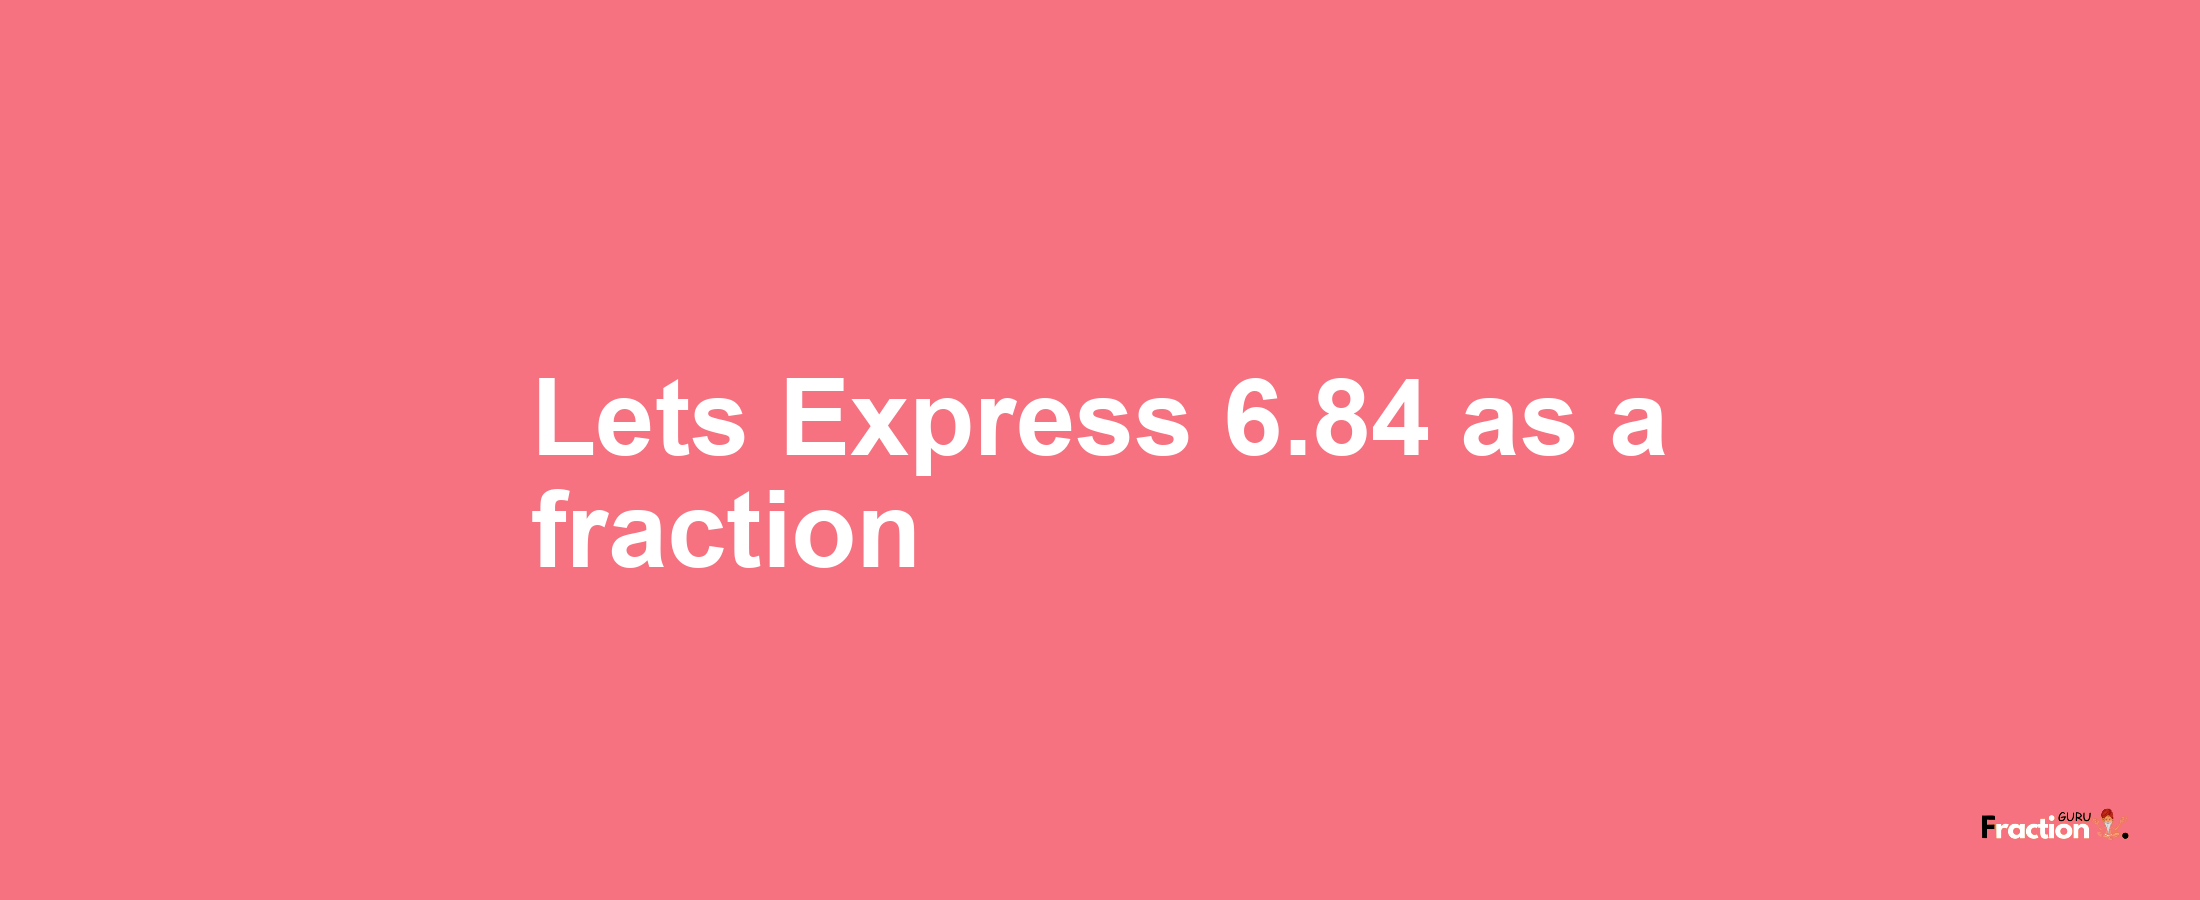 Lets Express 6.84 as afraction